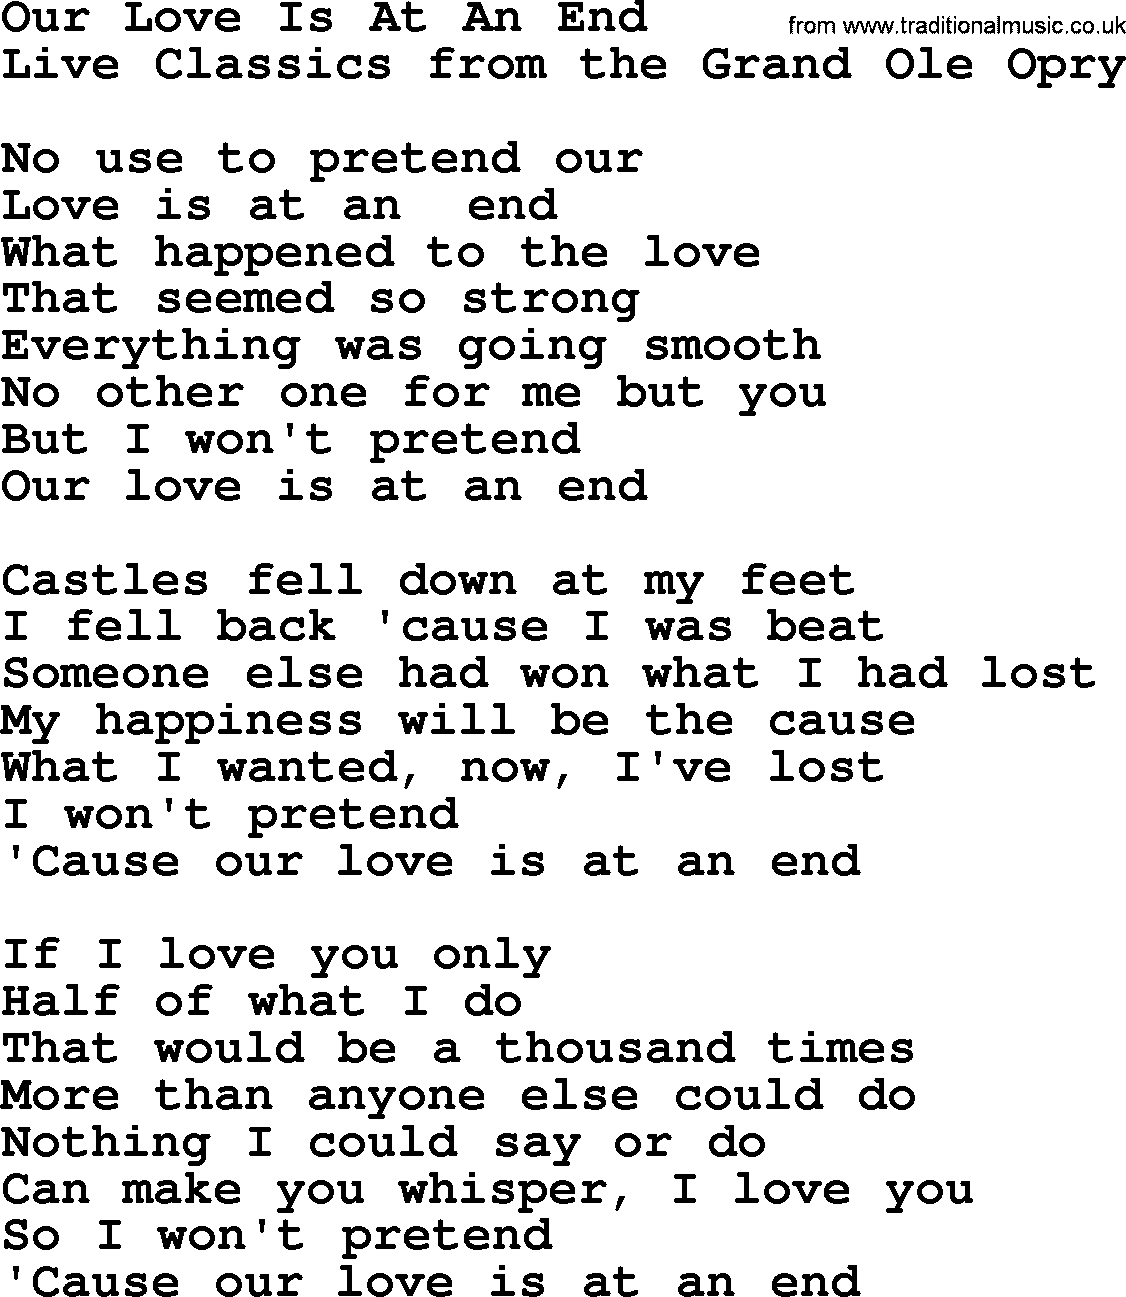 Marty Robbins song: Our Love Is At An End, lyrics